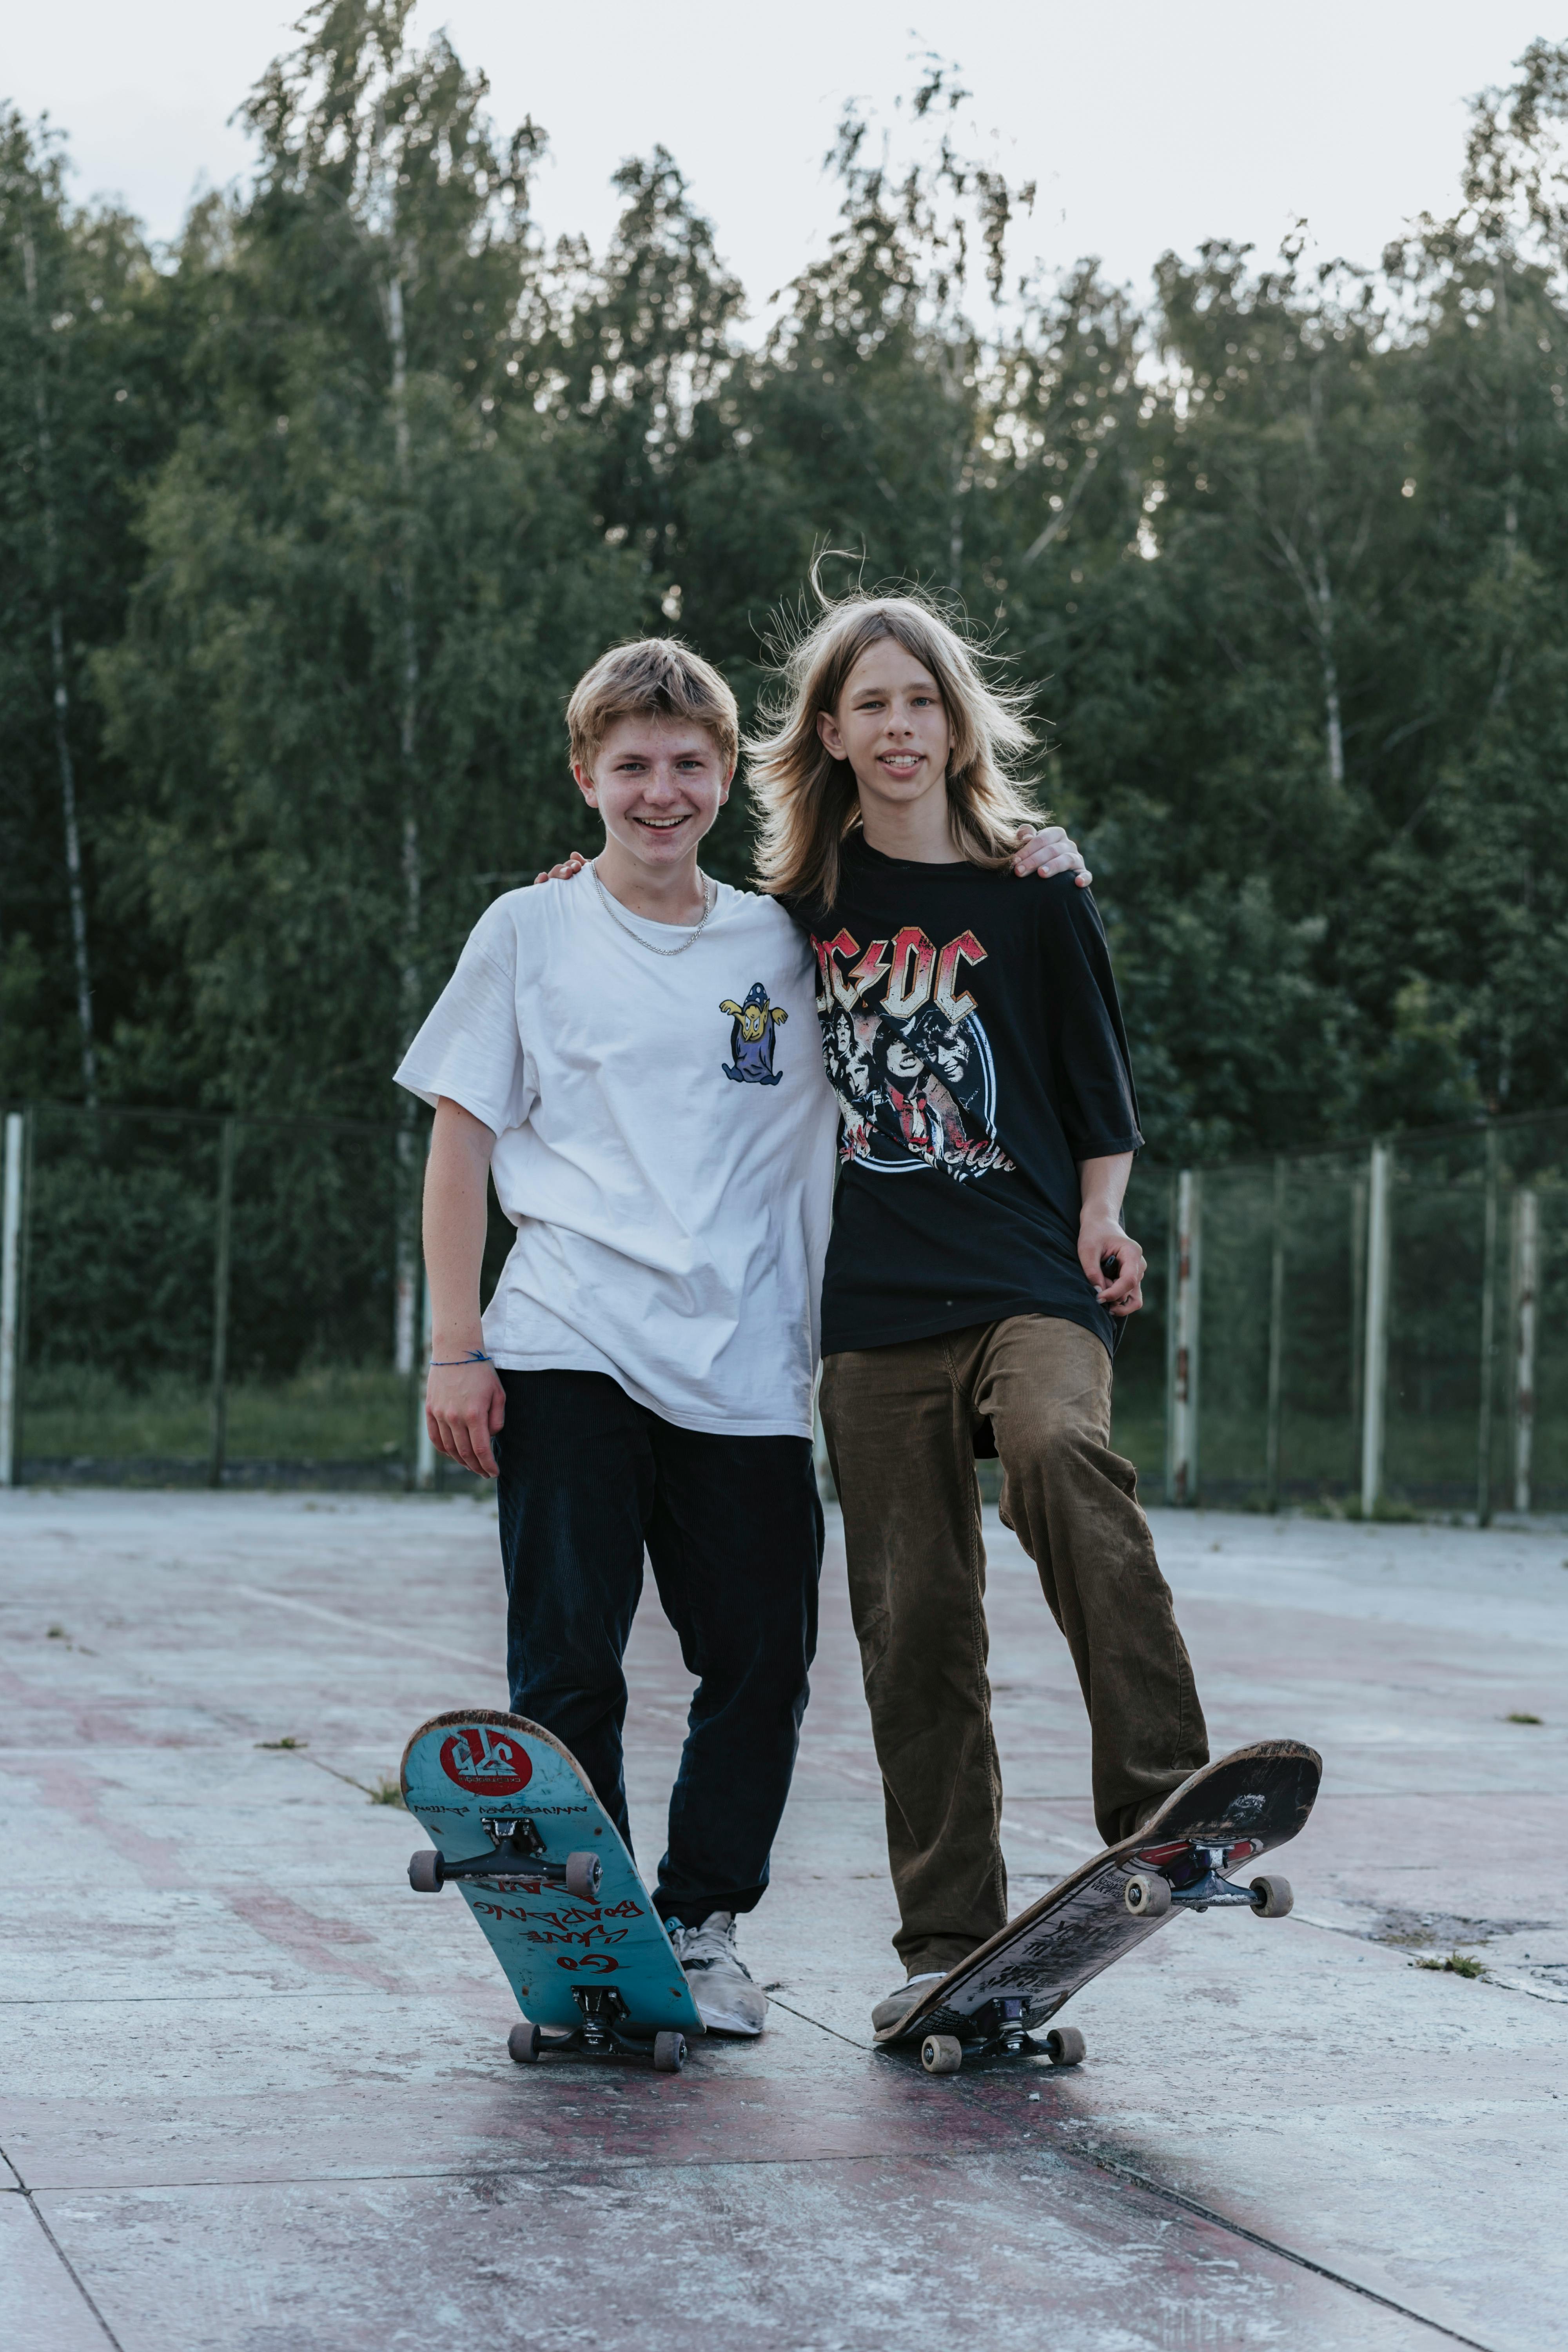 Two young boys standing on skateboards  | Source: Pexels